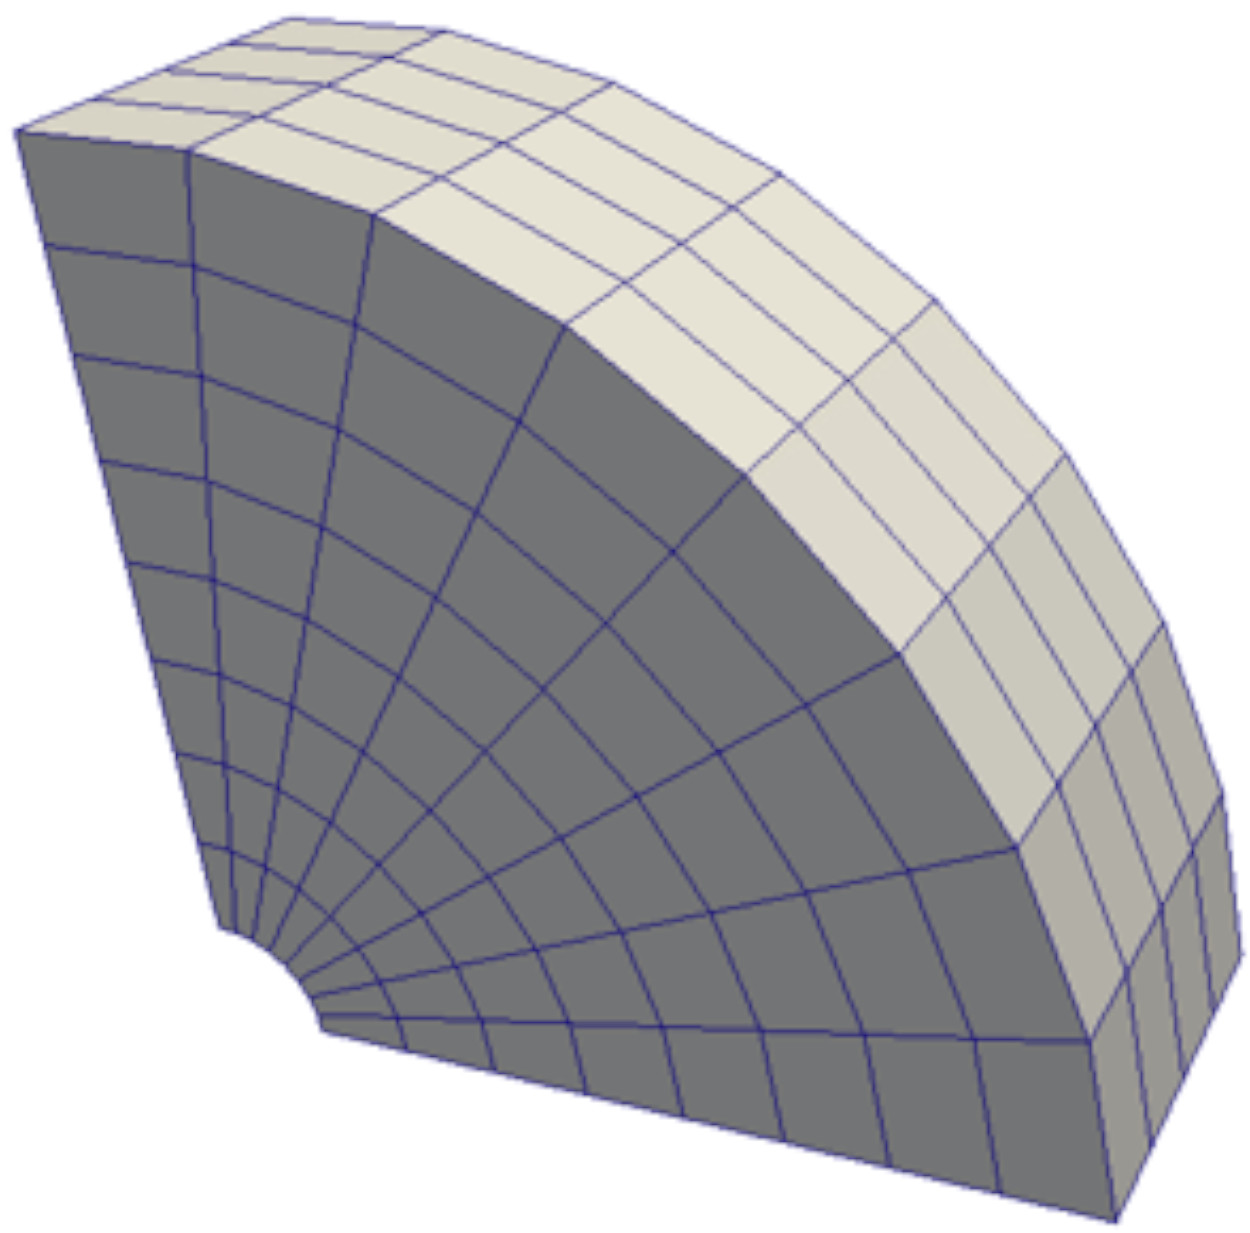 Curvilinear structured grid